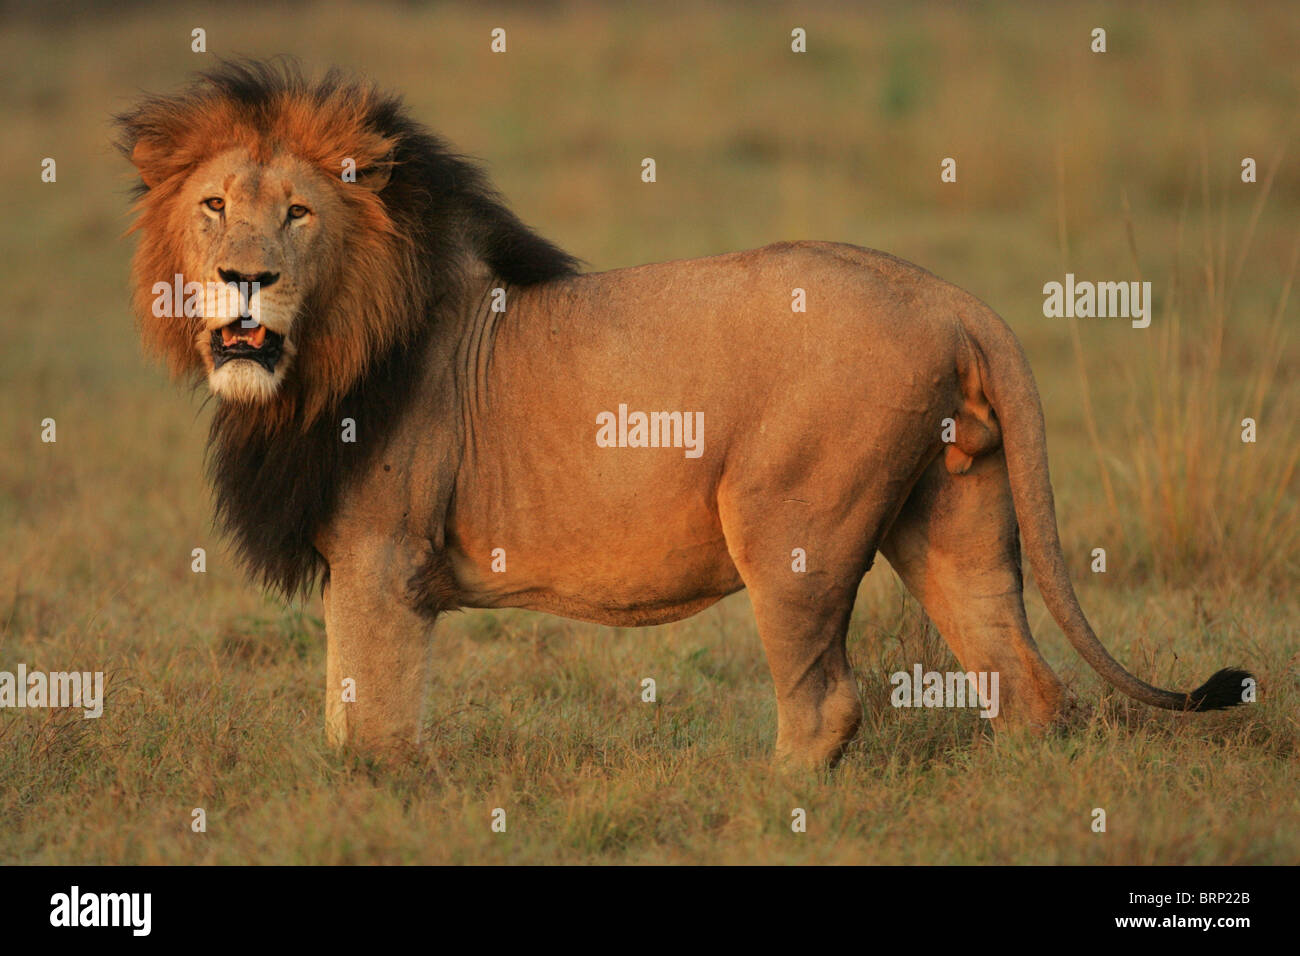 Male lion with a long black mane and its mouth slightly open standing by itself in dry grass Stock Photo